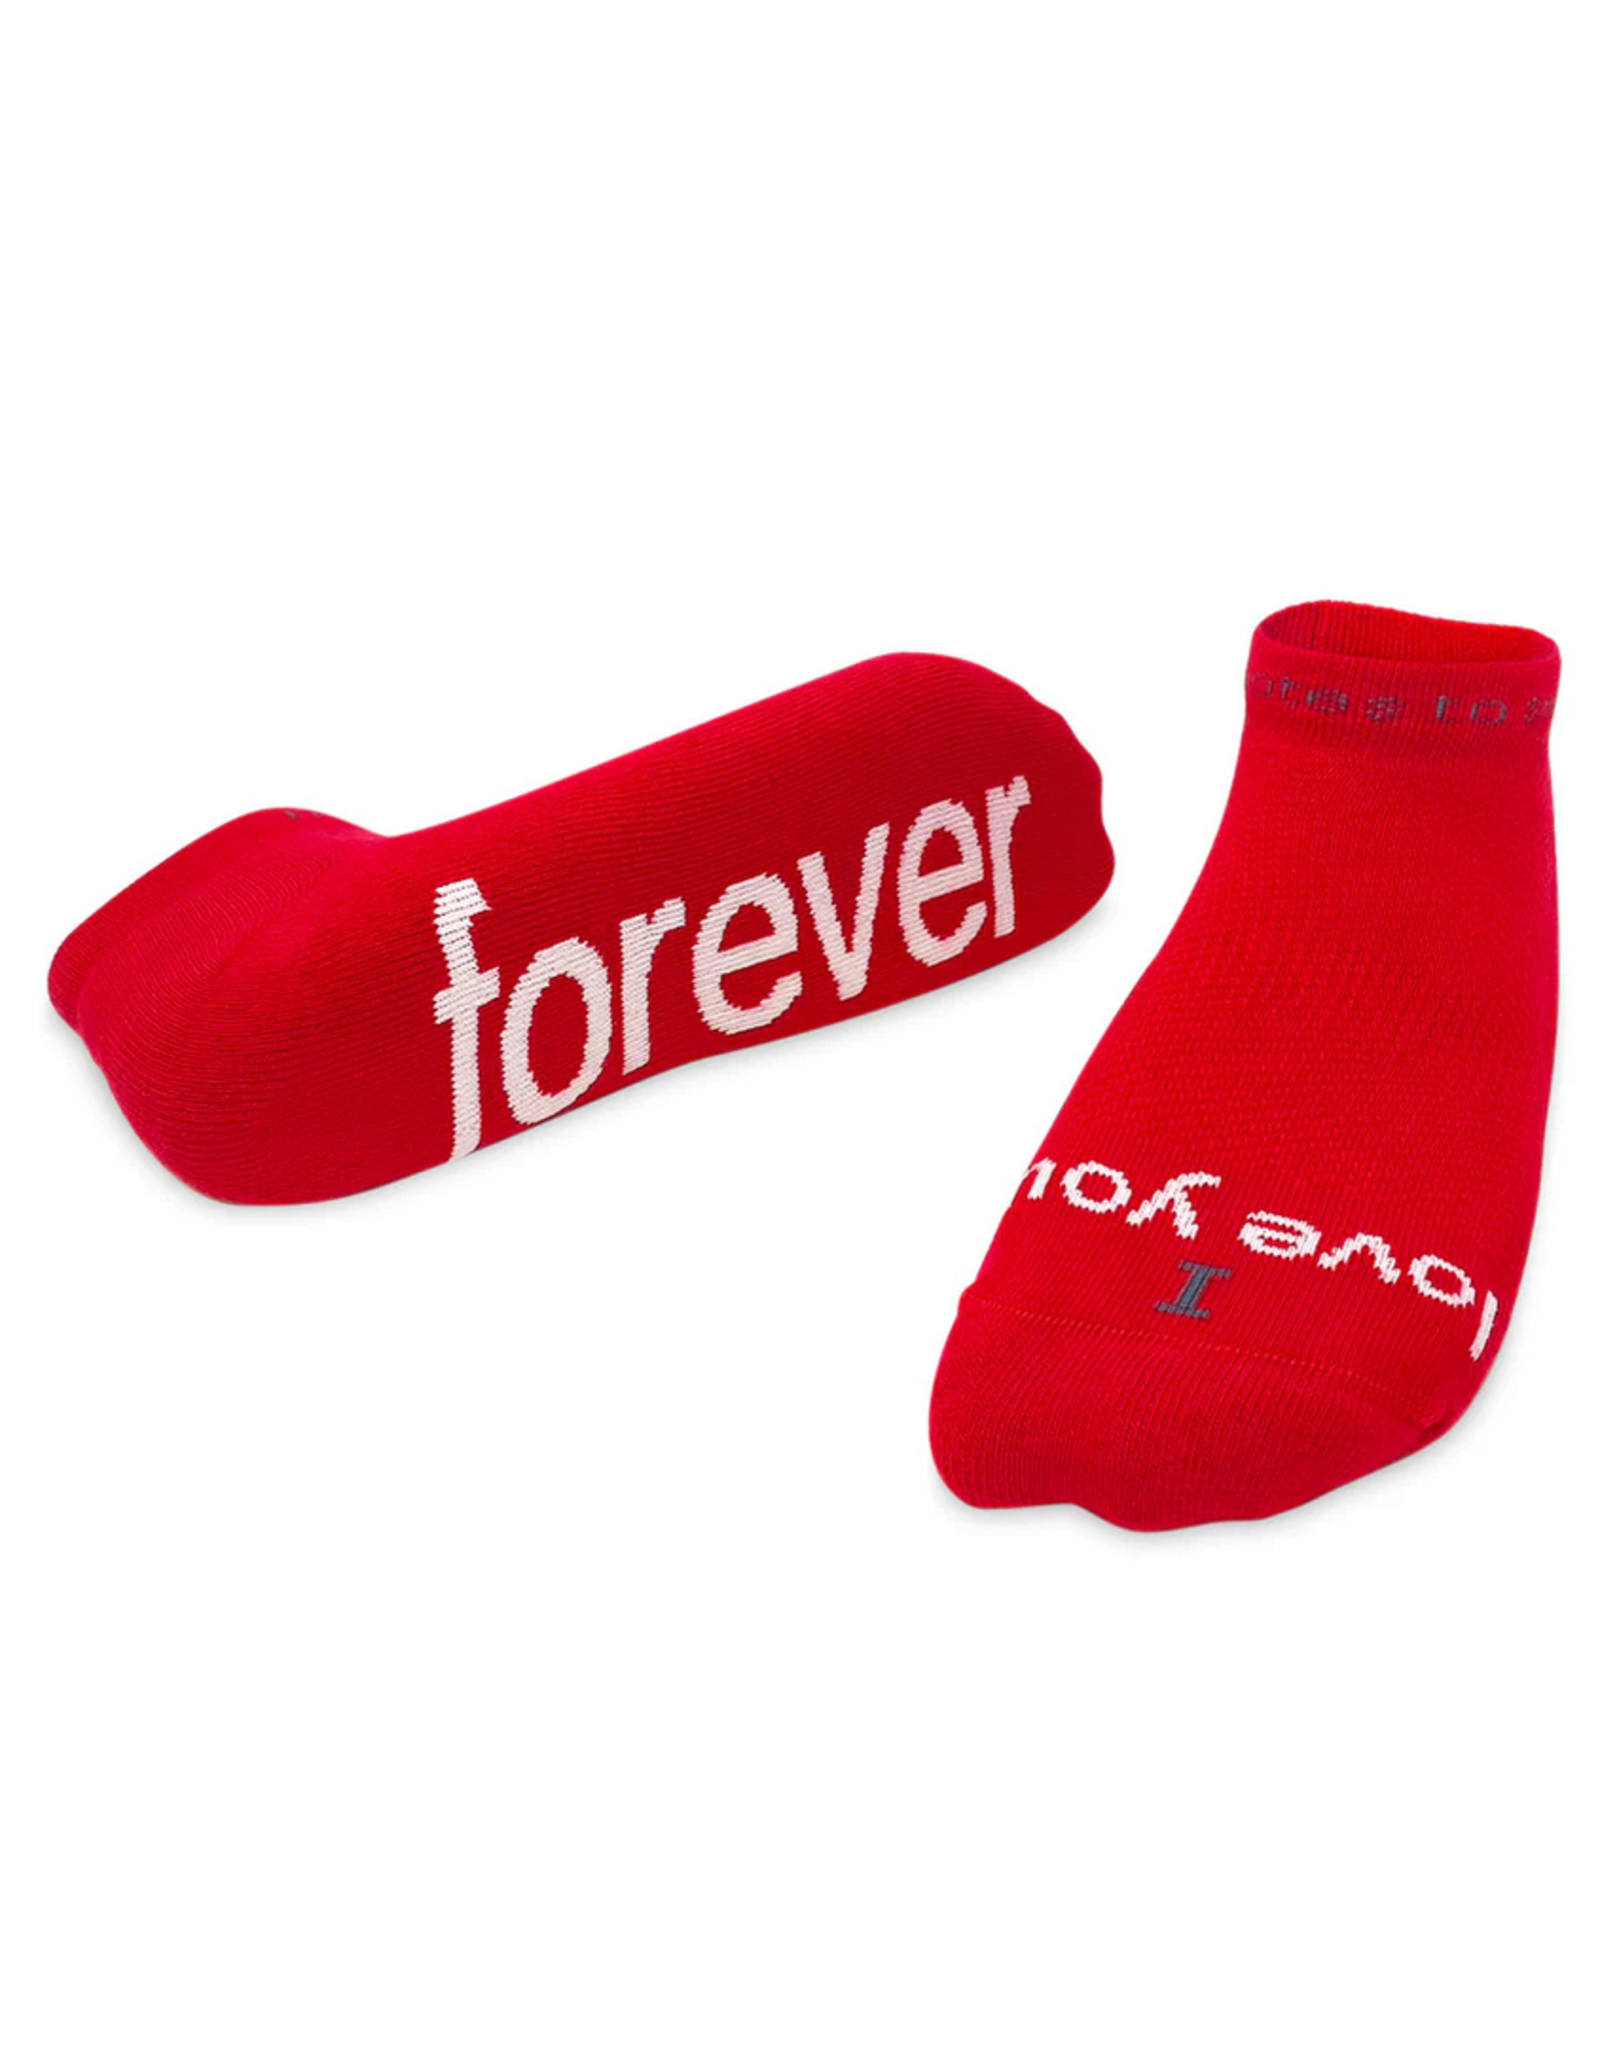 notes to self Notes to Self FOREVER 'I love you - forever' Low-Cut Socks